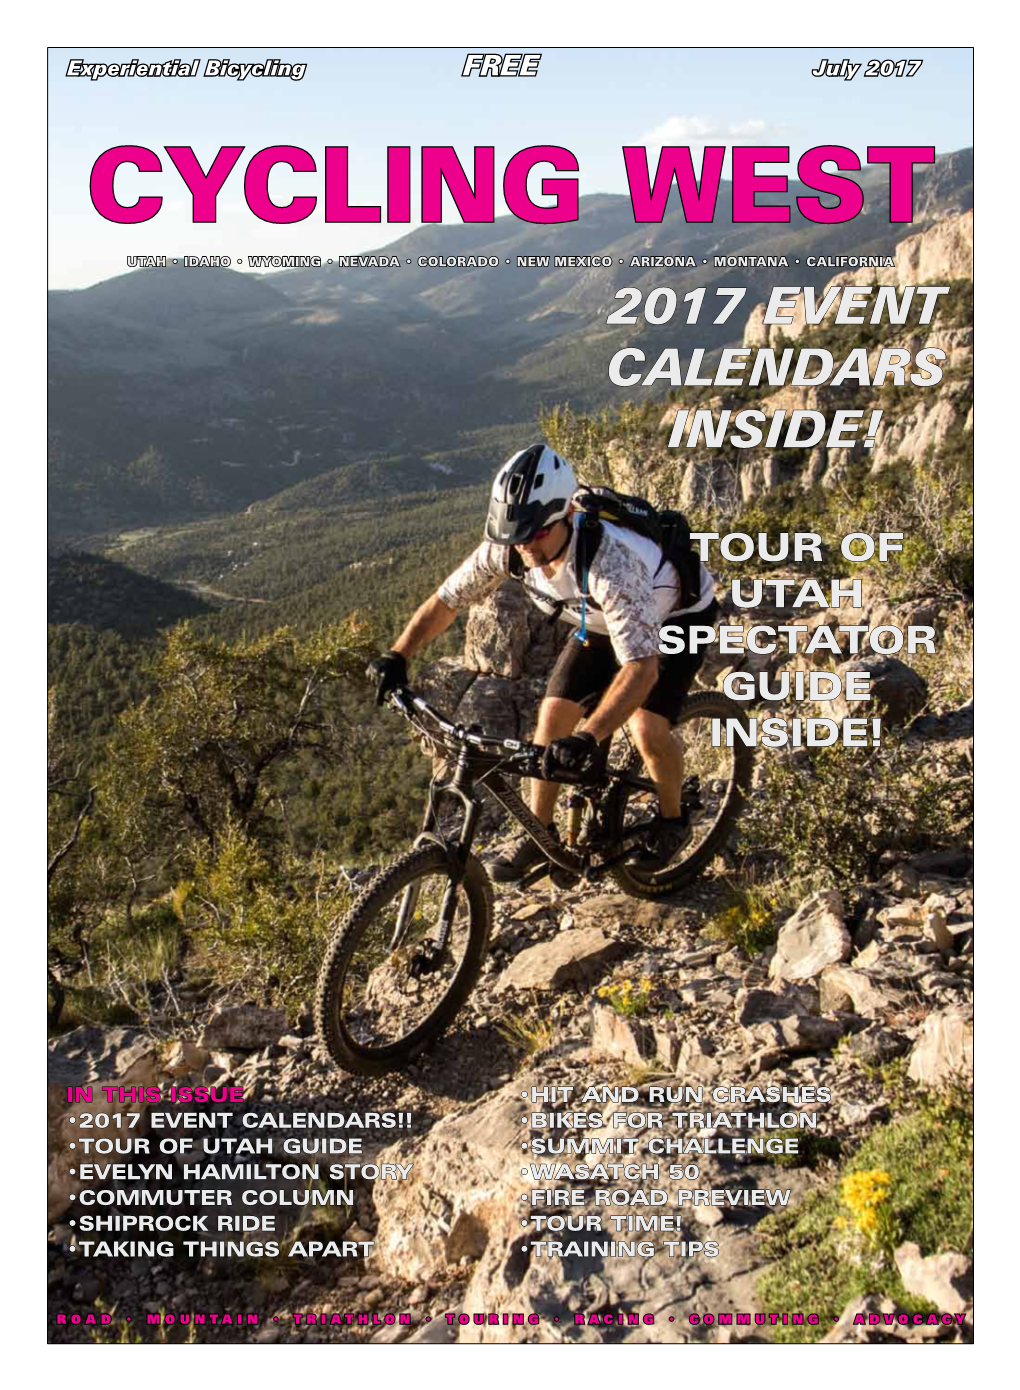 Cycling Utah and Cycling West Magazine Winter 2016-2017 Issue